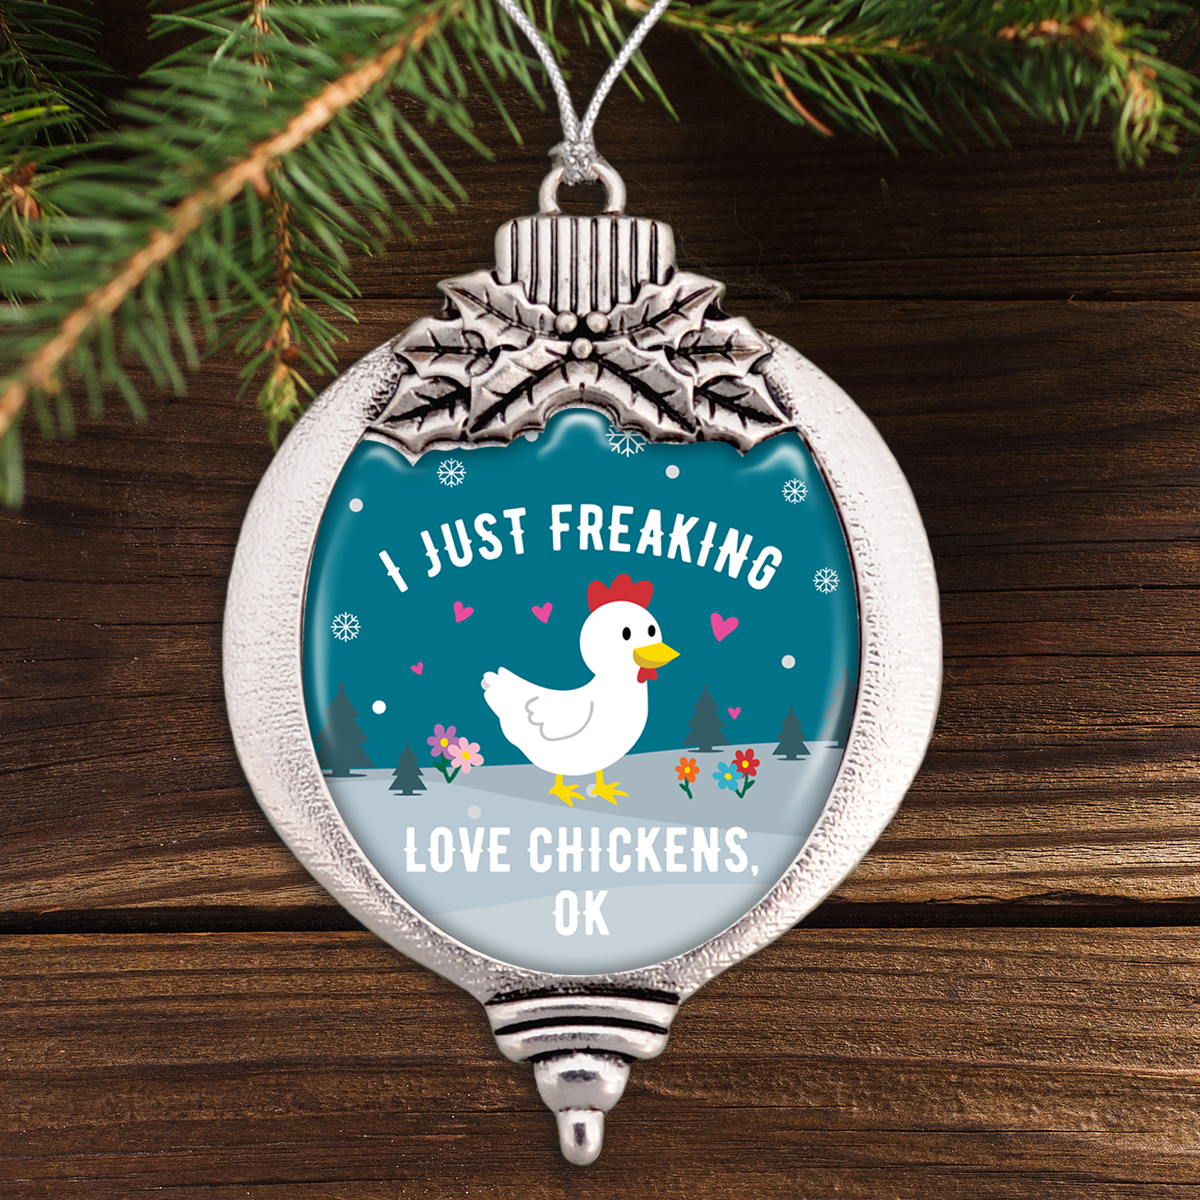 I Just Freaking Love Chickens, OK? - Chicken Bulb Ornament